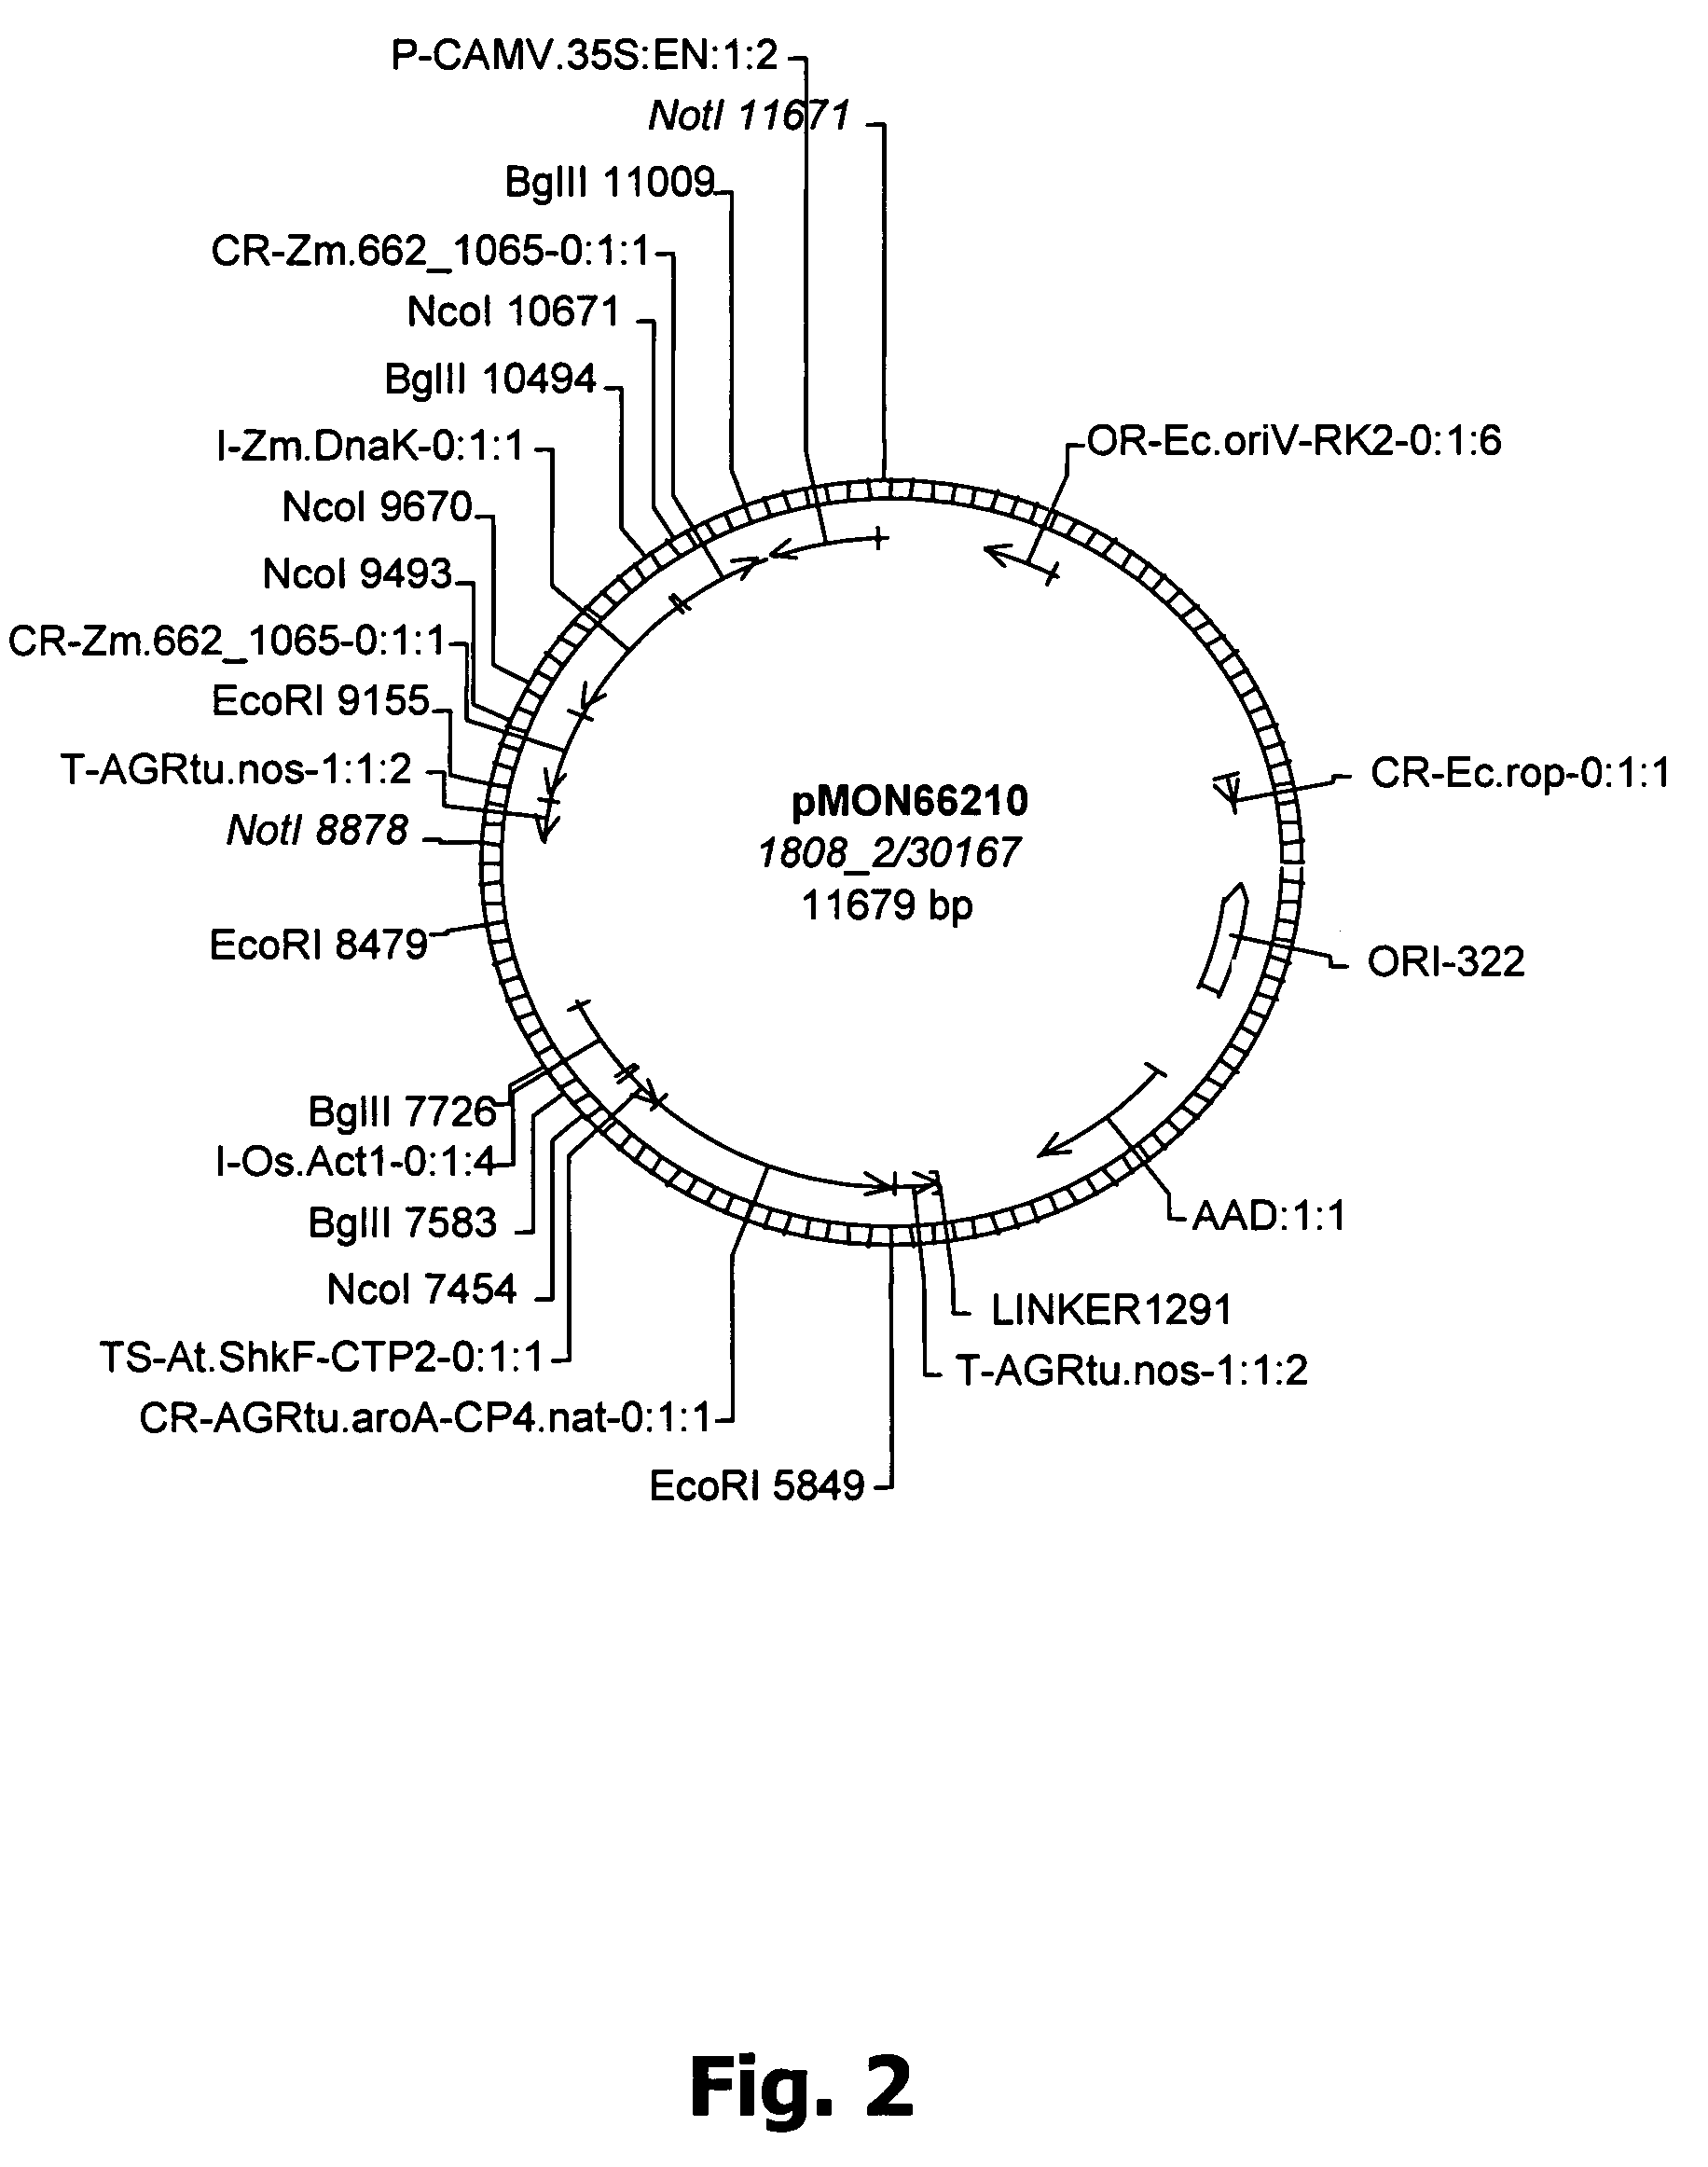 Method for altering nitrogen or oil content of seeds by down regulating AGL11 expression or activity